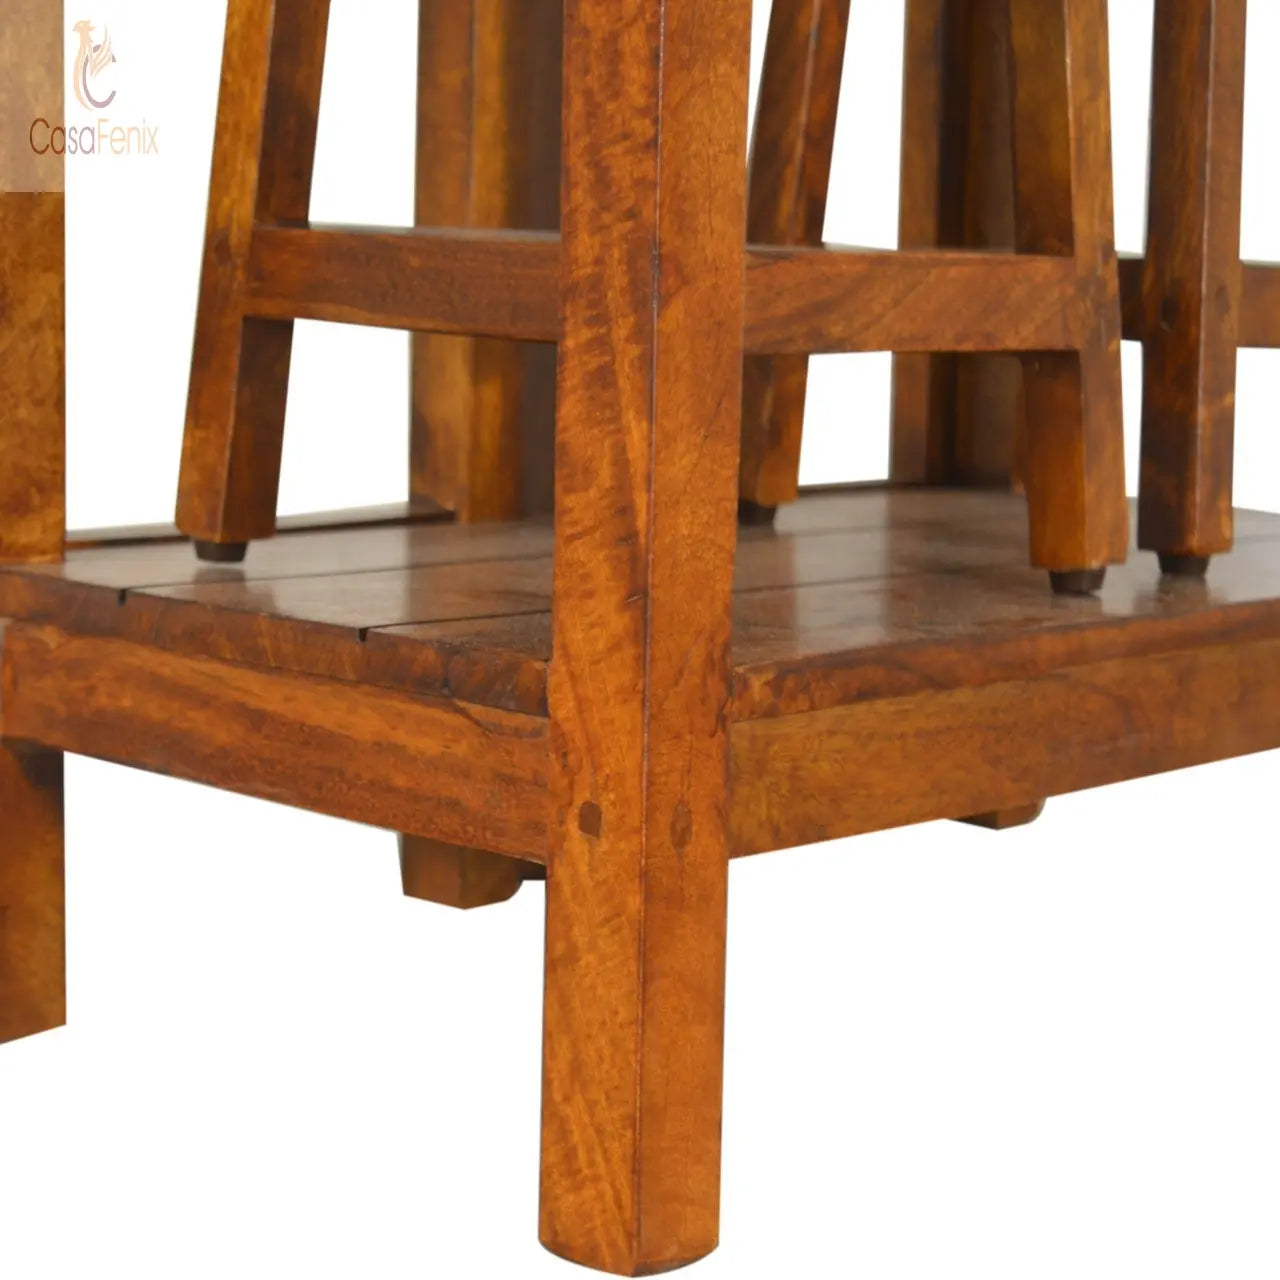 Chestnut Breakfast Table With 2 Stools 100% solid mango wood and has a rich chestnut finish. - CasaFenix